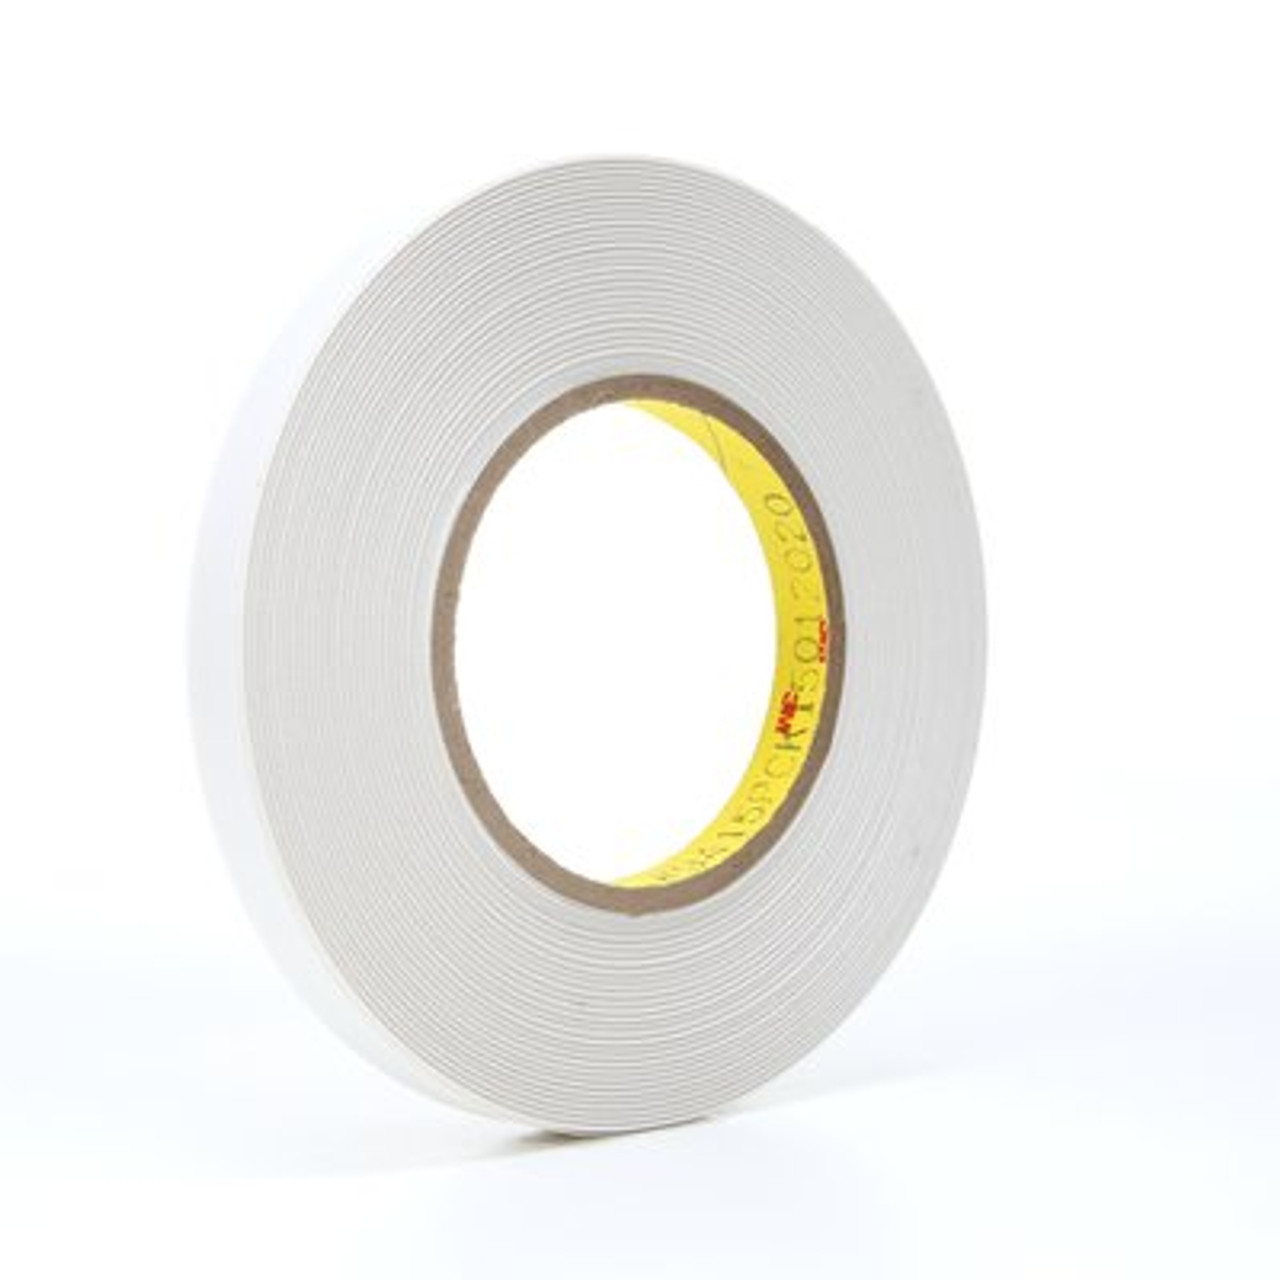 3M™ Removable Repositionable Tape 9415PC, Clear, 1/2 in x 72 yd, 2 mil